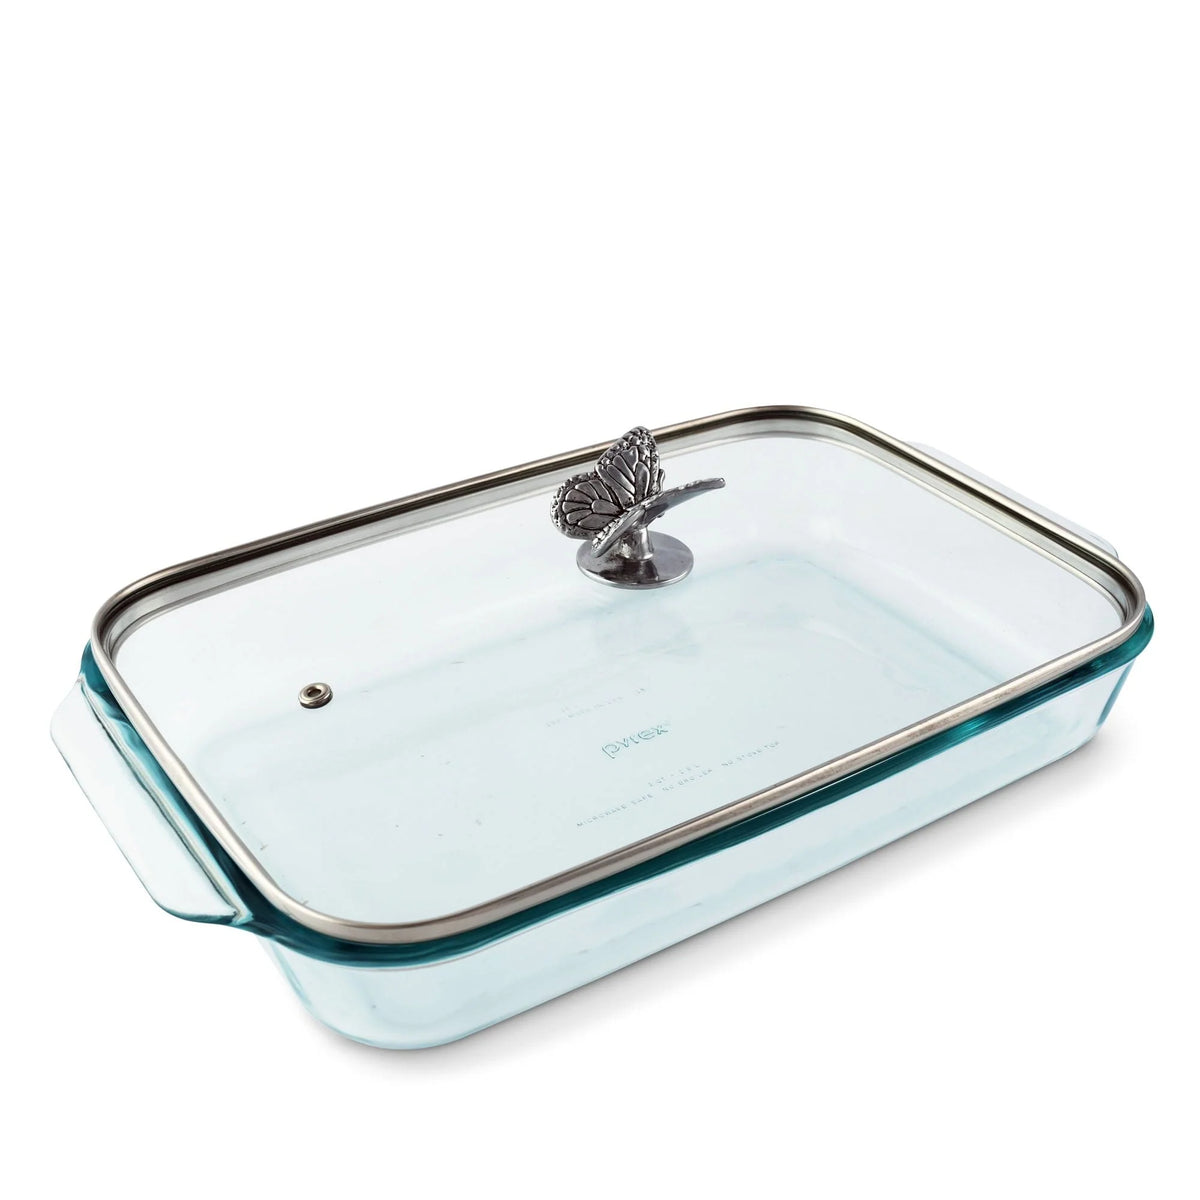 Pyrex 3 Quart Baking Dish with Butterfly Lid